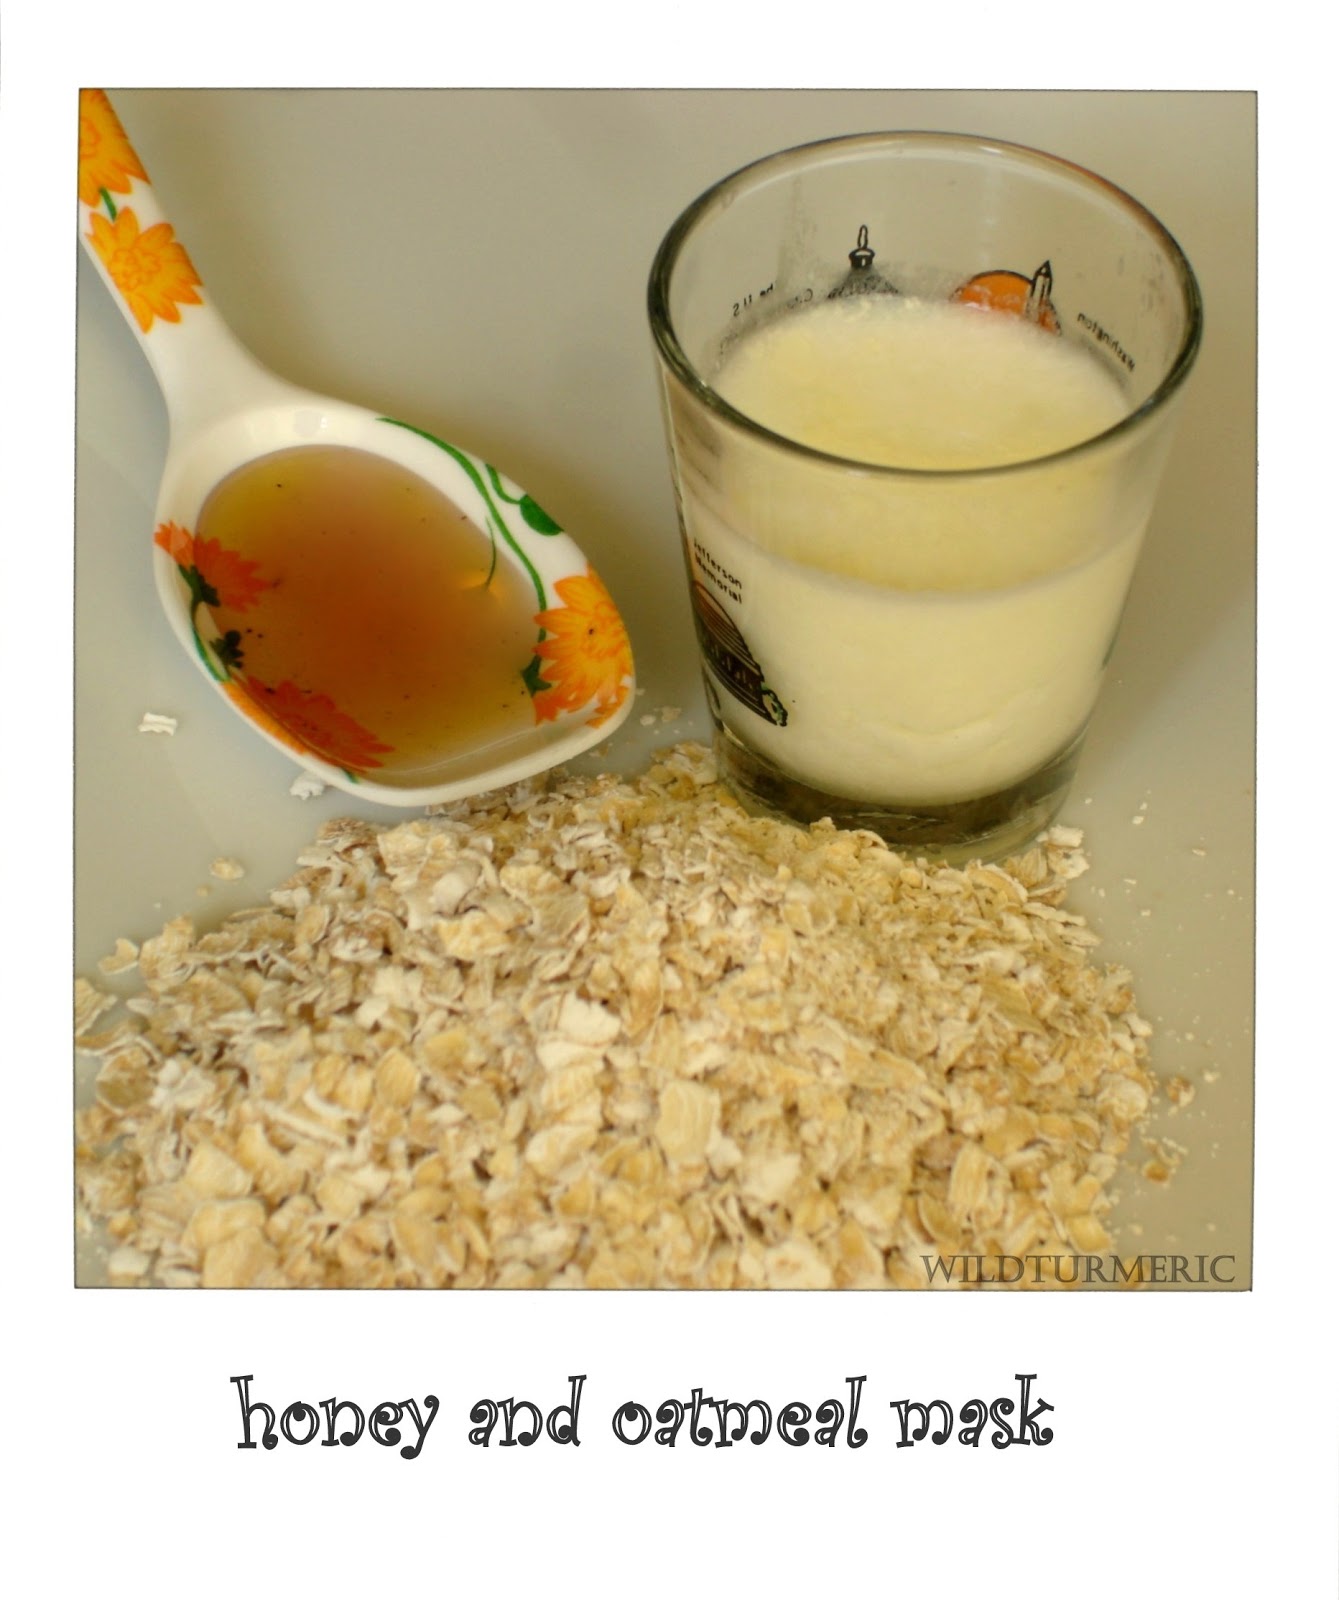 4 Easy Steps To Make Honey & Oatmeal Face Mask at Home